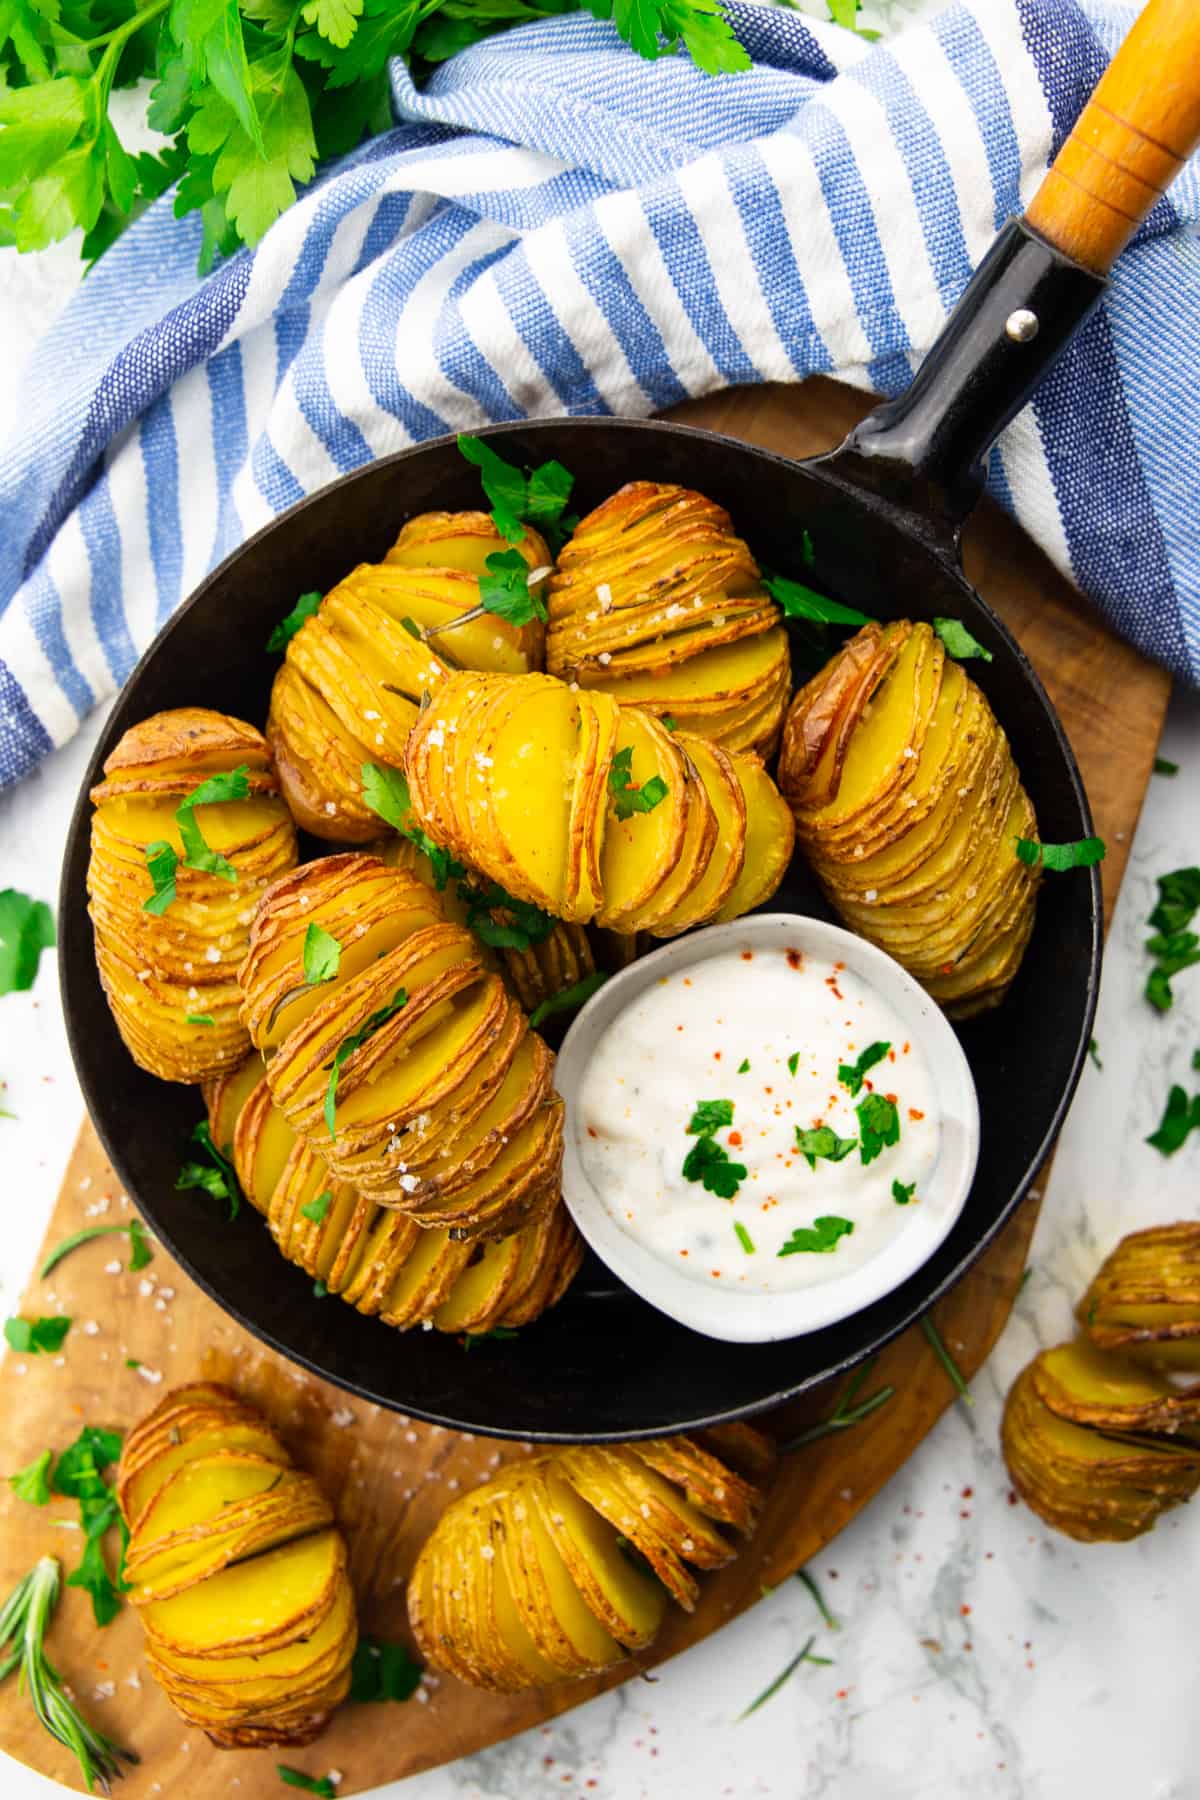 hasselback potatoes in a black pan on a wooden board with a small bowl of sour cream on the side